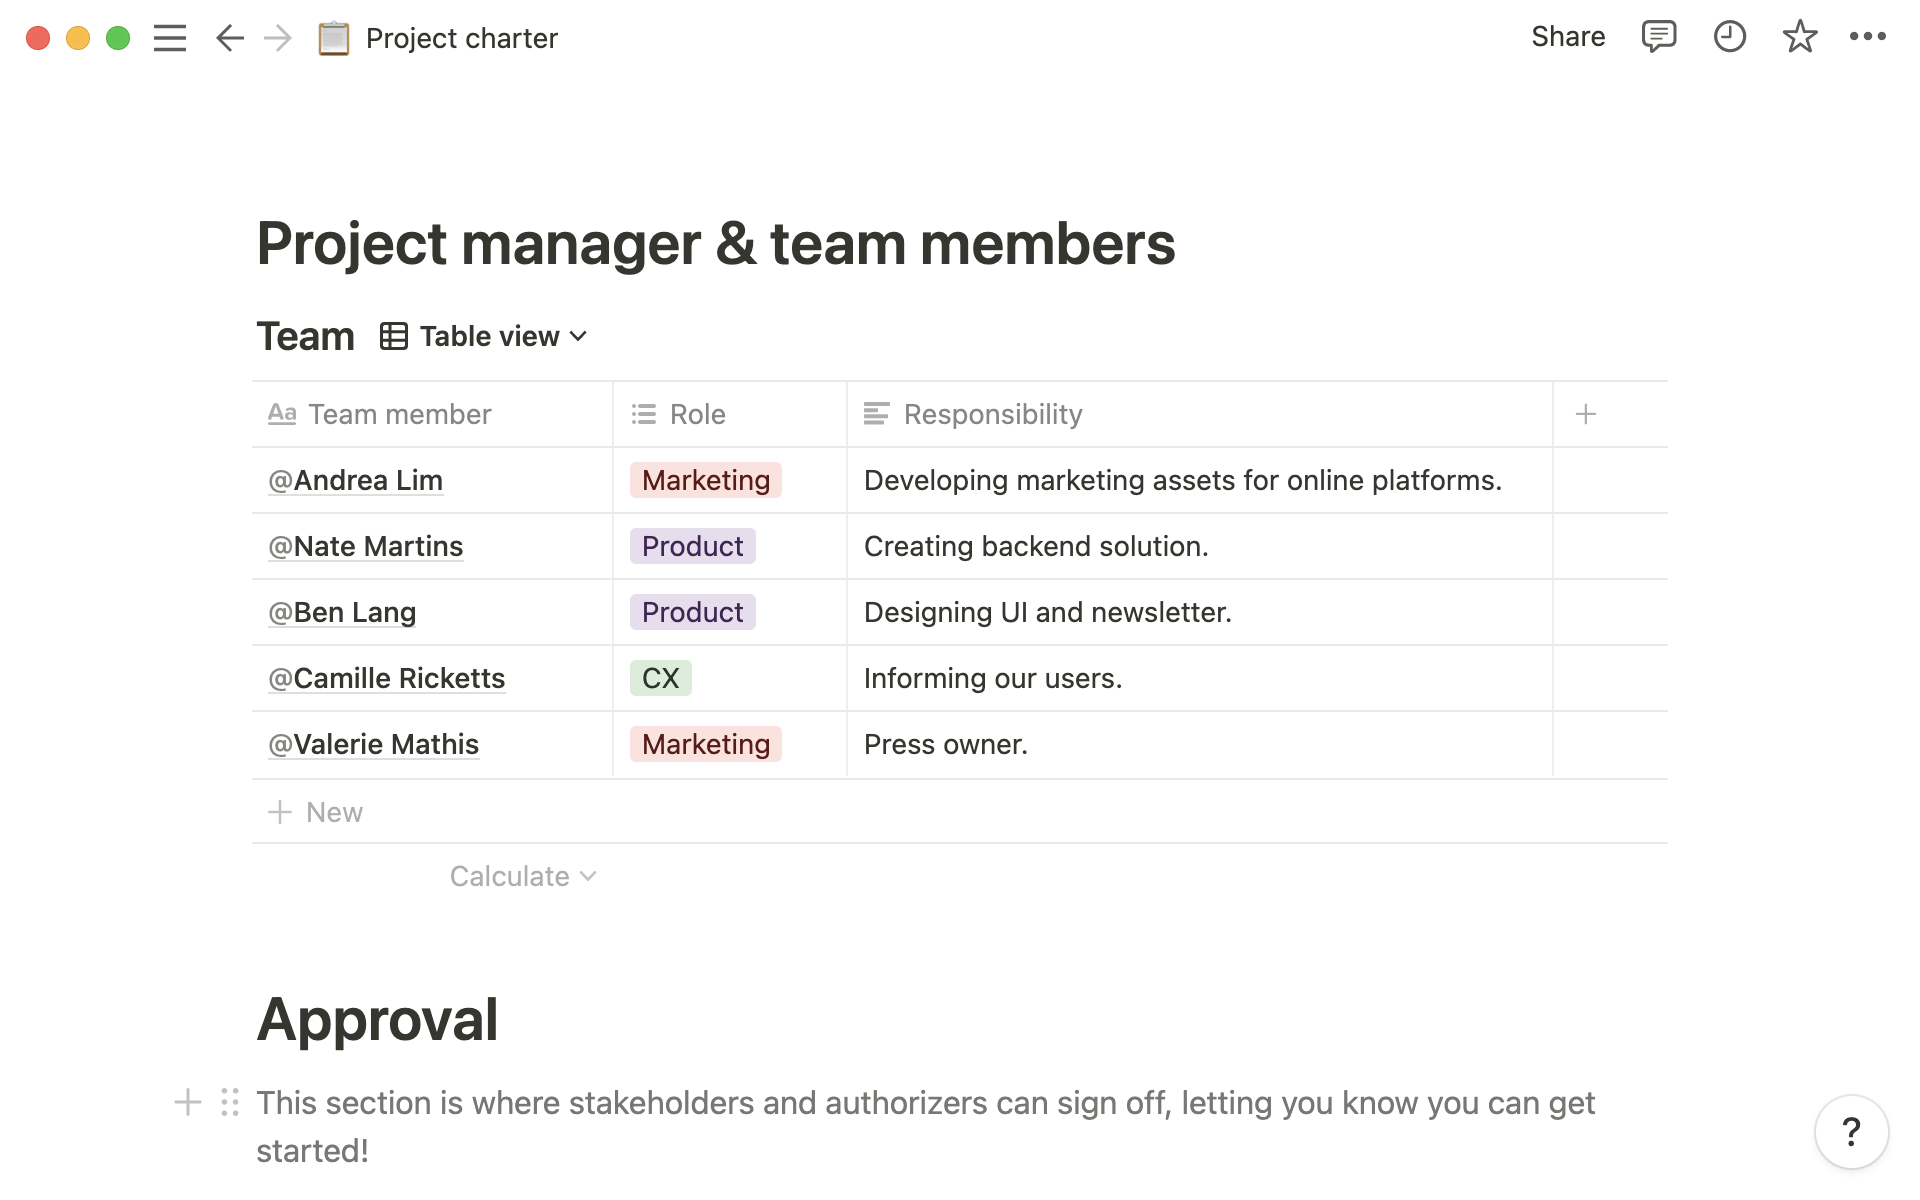 Project charter template - teammates 